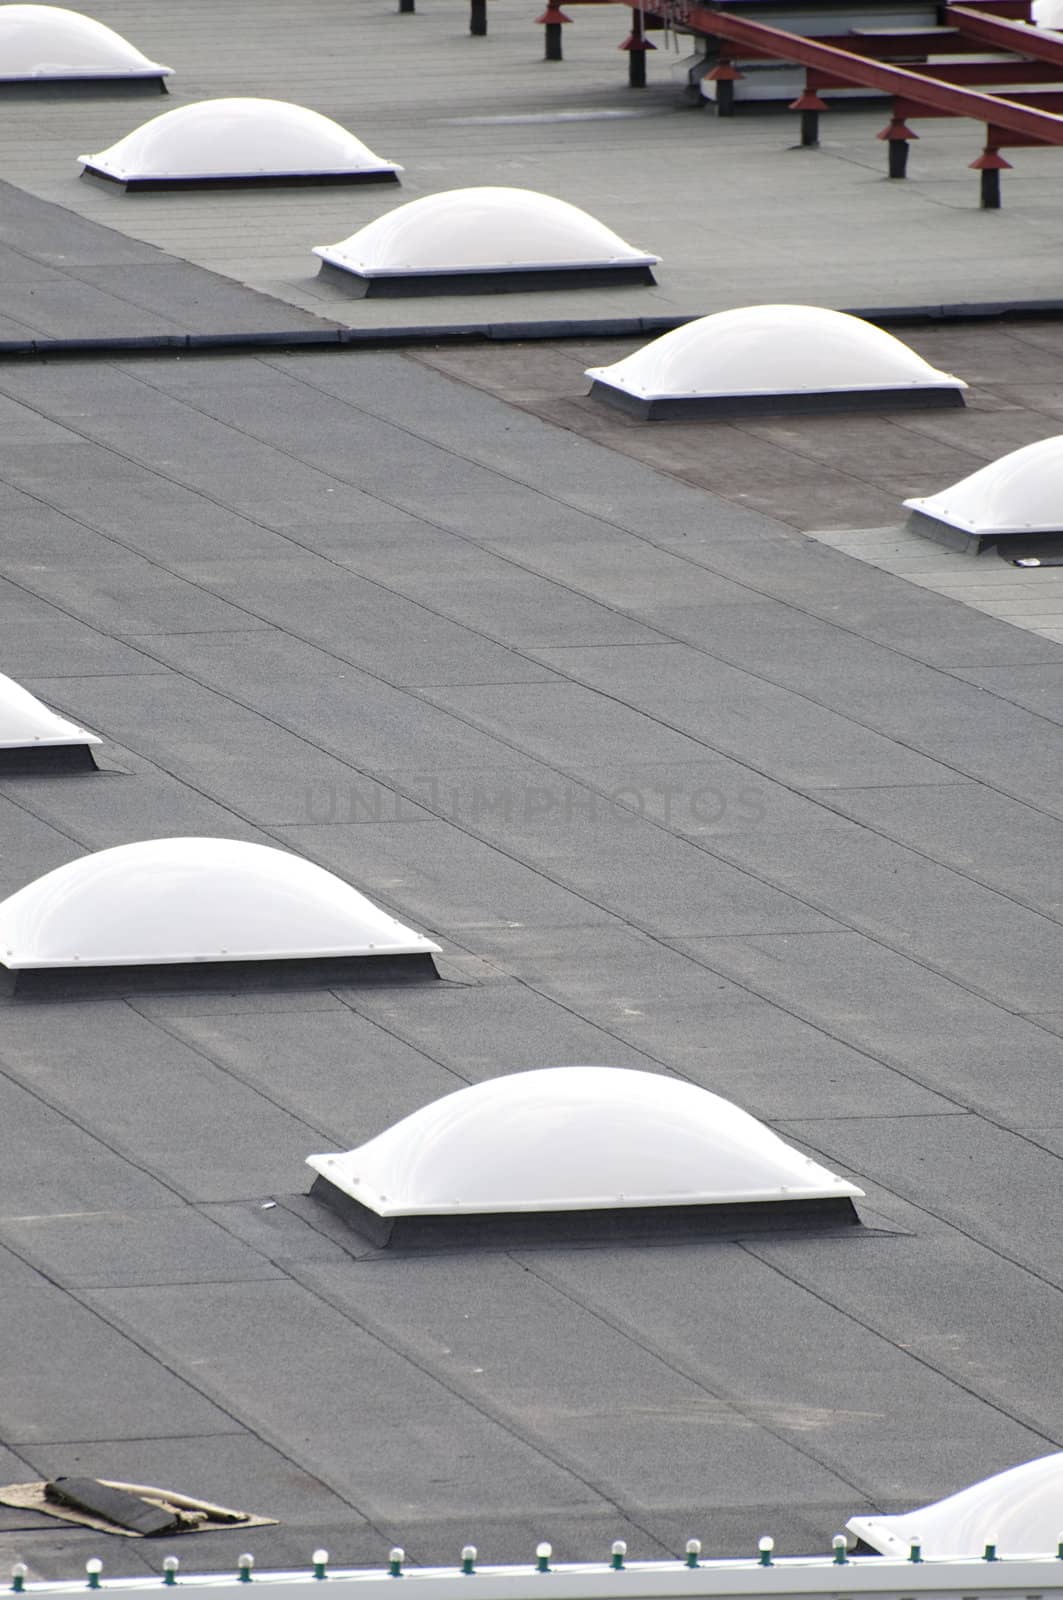 Roof skylight�s picture from Spain, Europe.